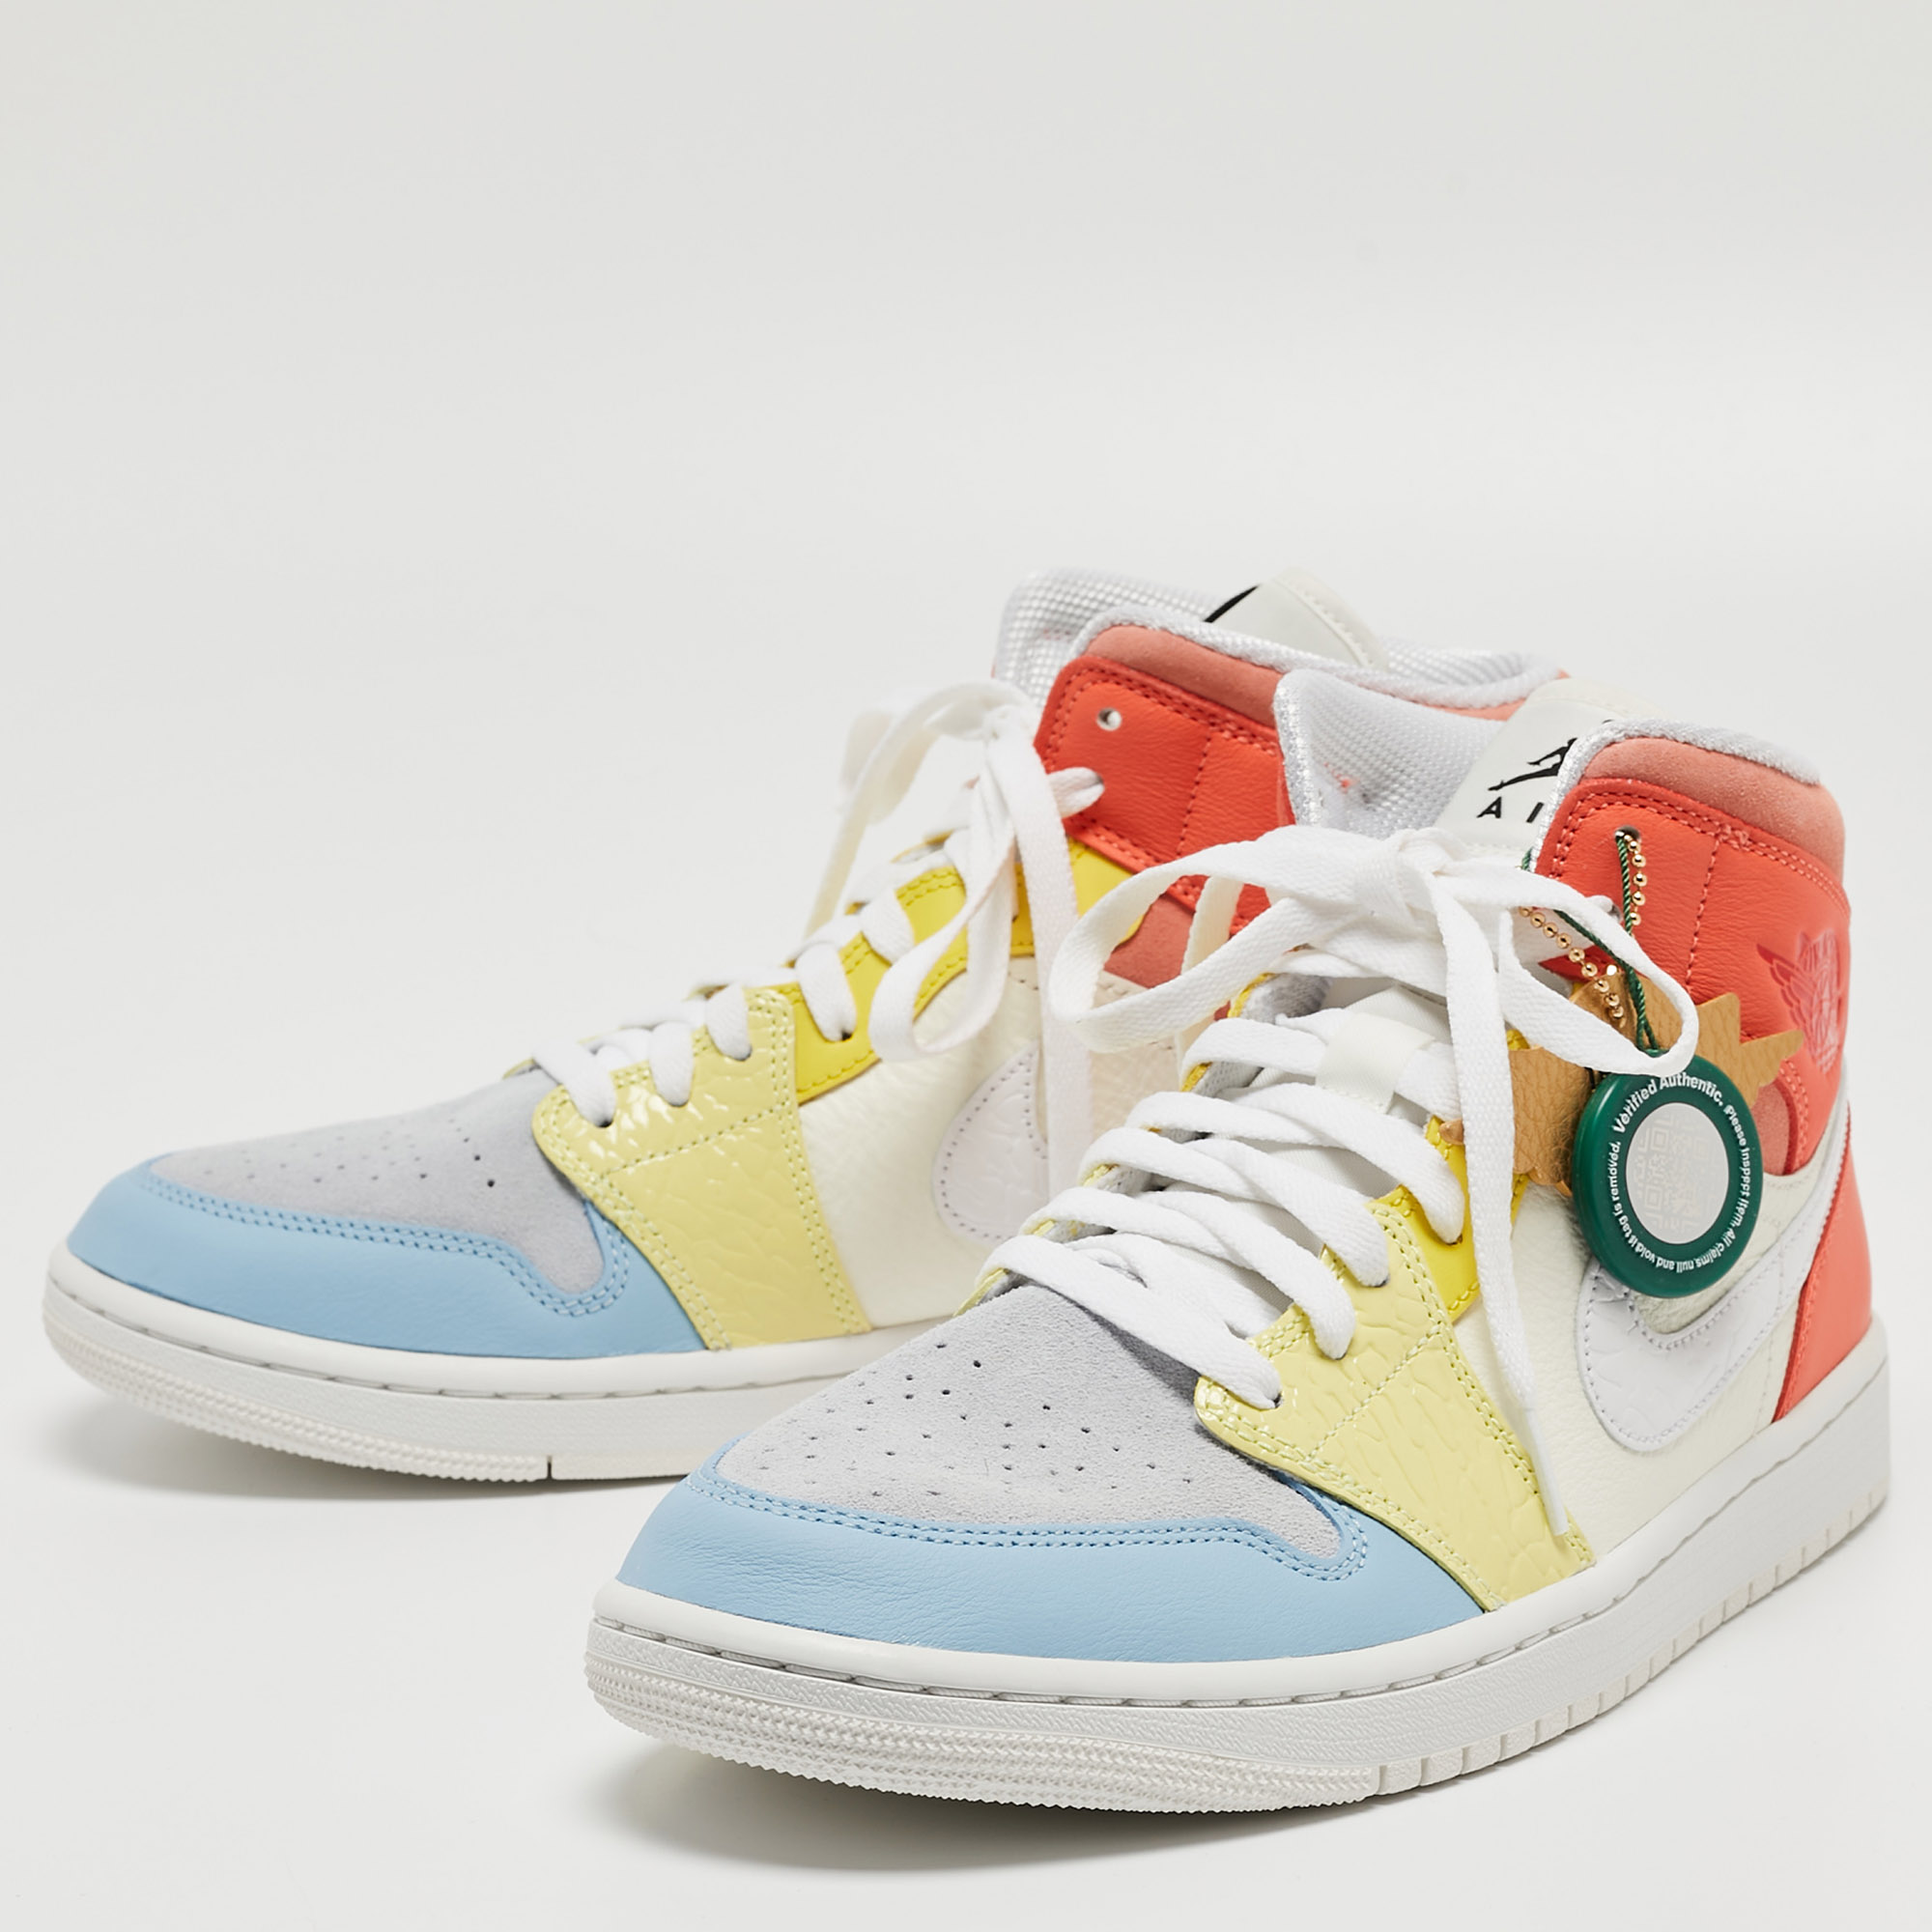 

Air Jordan Multicolor Leather and Suede Jordan 1 Mid To My First Coach Sneakers Size